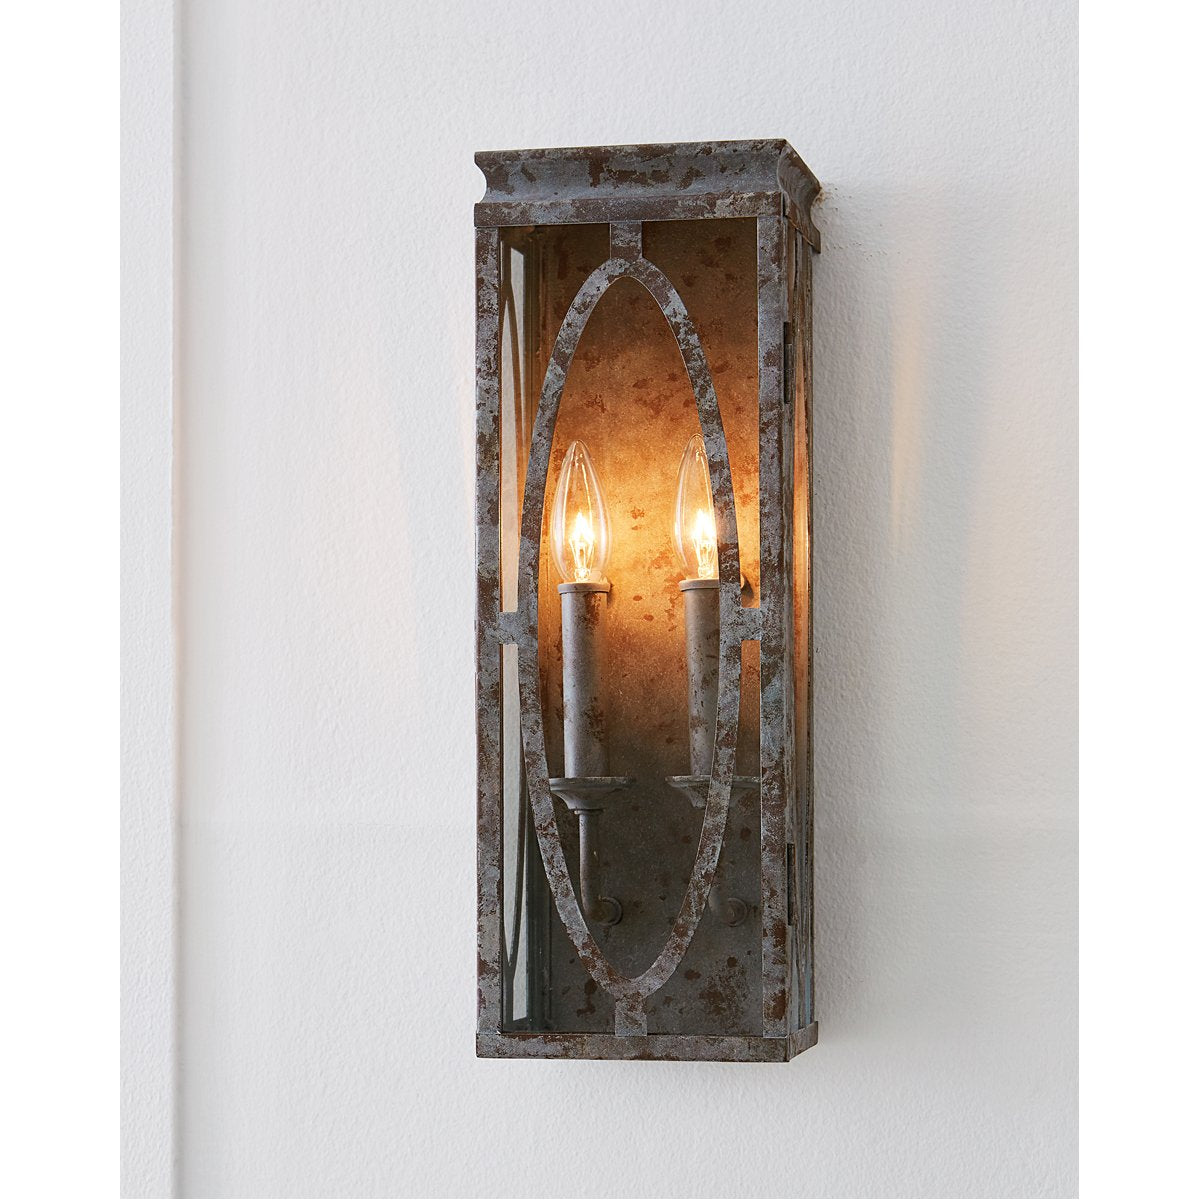 Feiss Patrice 2-Light Wall Sconce